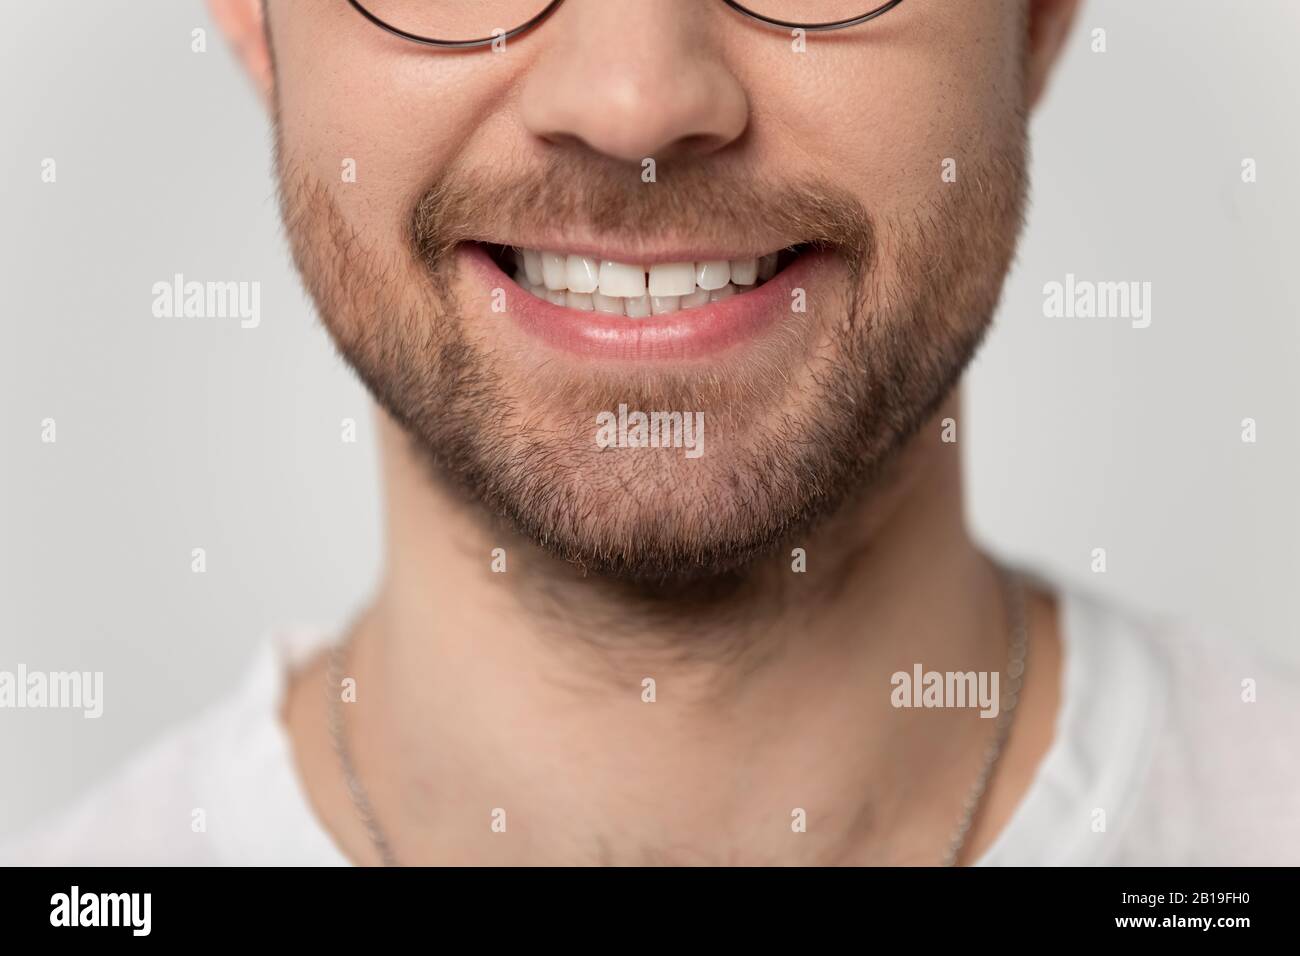 Close up cropped image wide toothy smiling young bearded man. Stock Photo